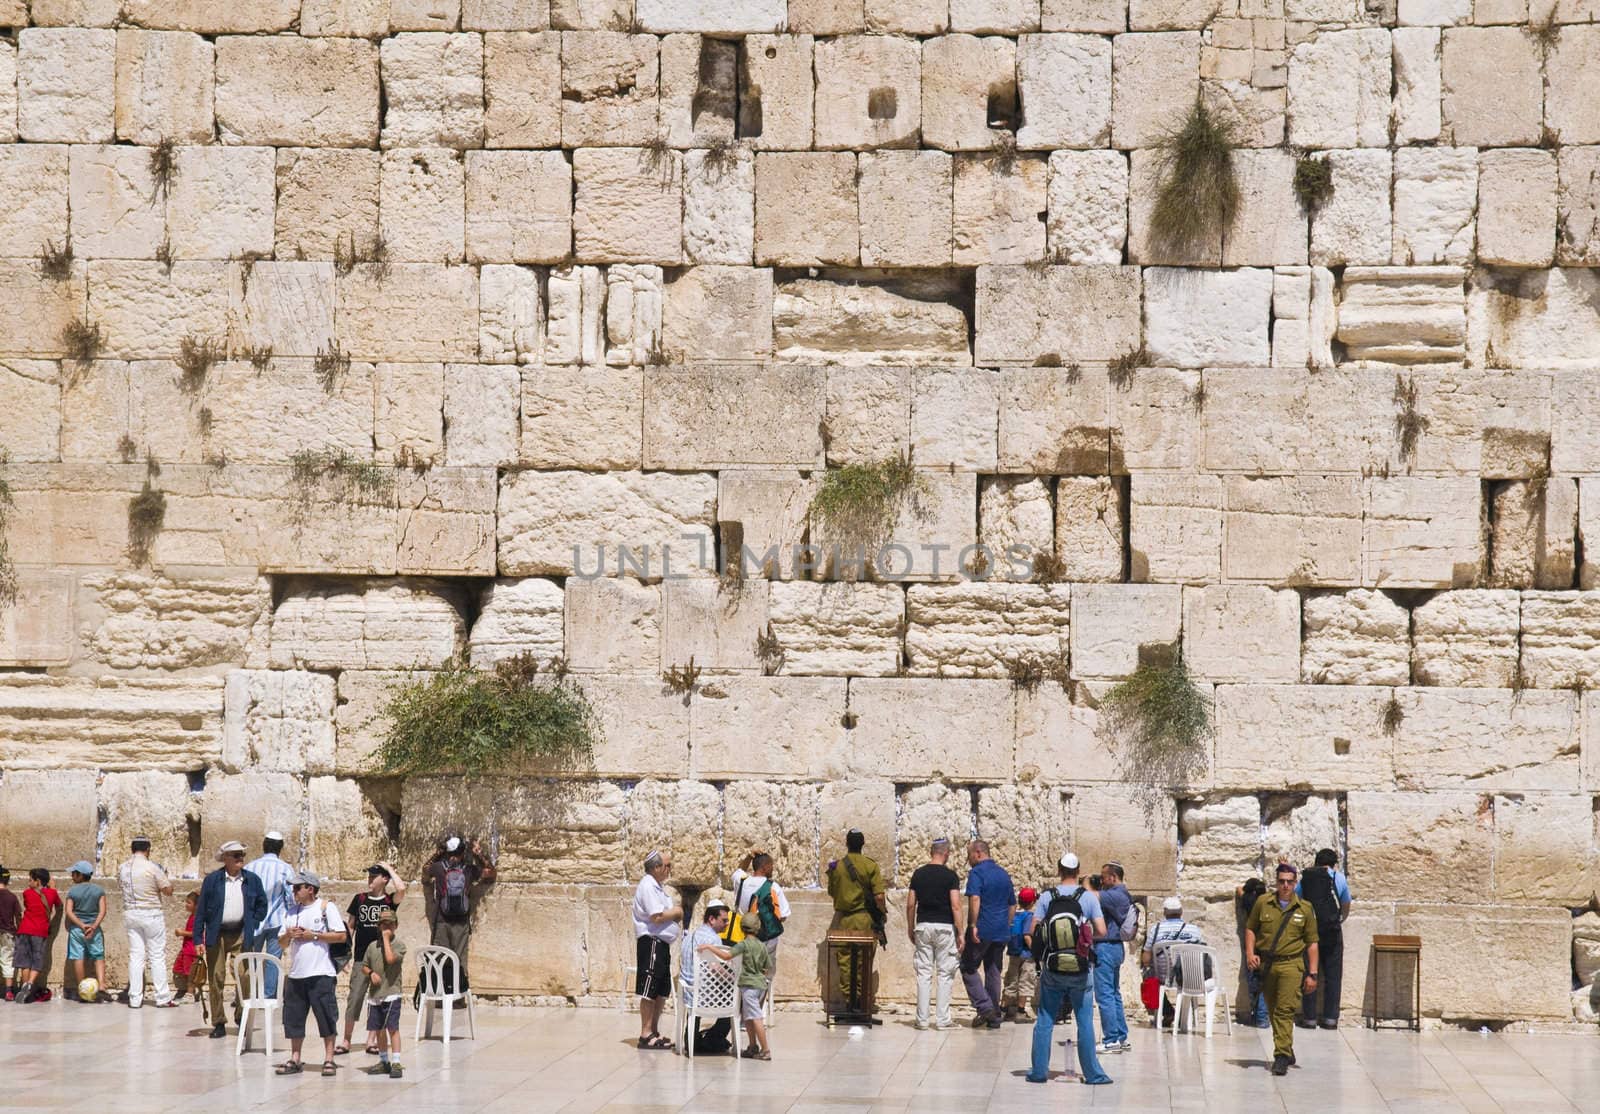 September 2008 Jerusalem Israel - The western wall Important Jewish religious site located in the Old City of Jerusalem 